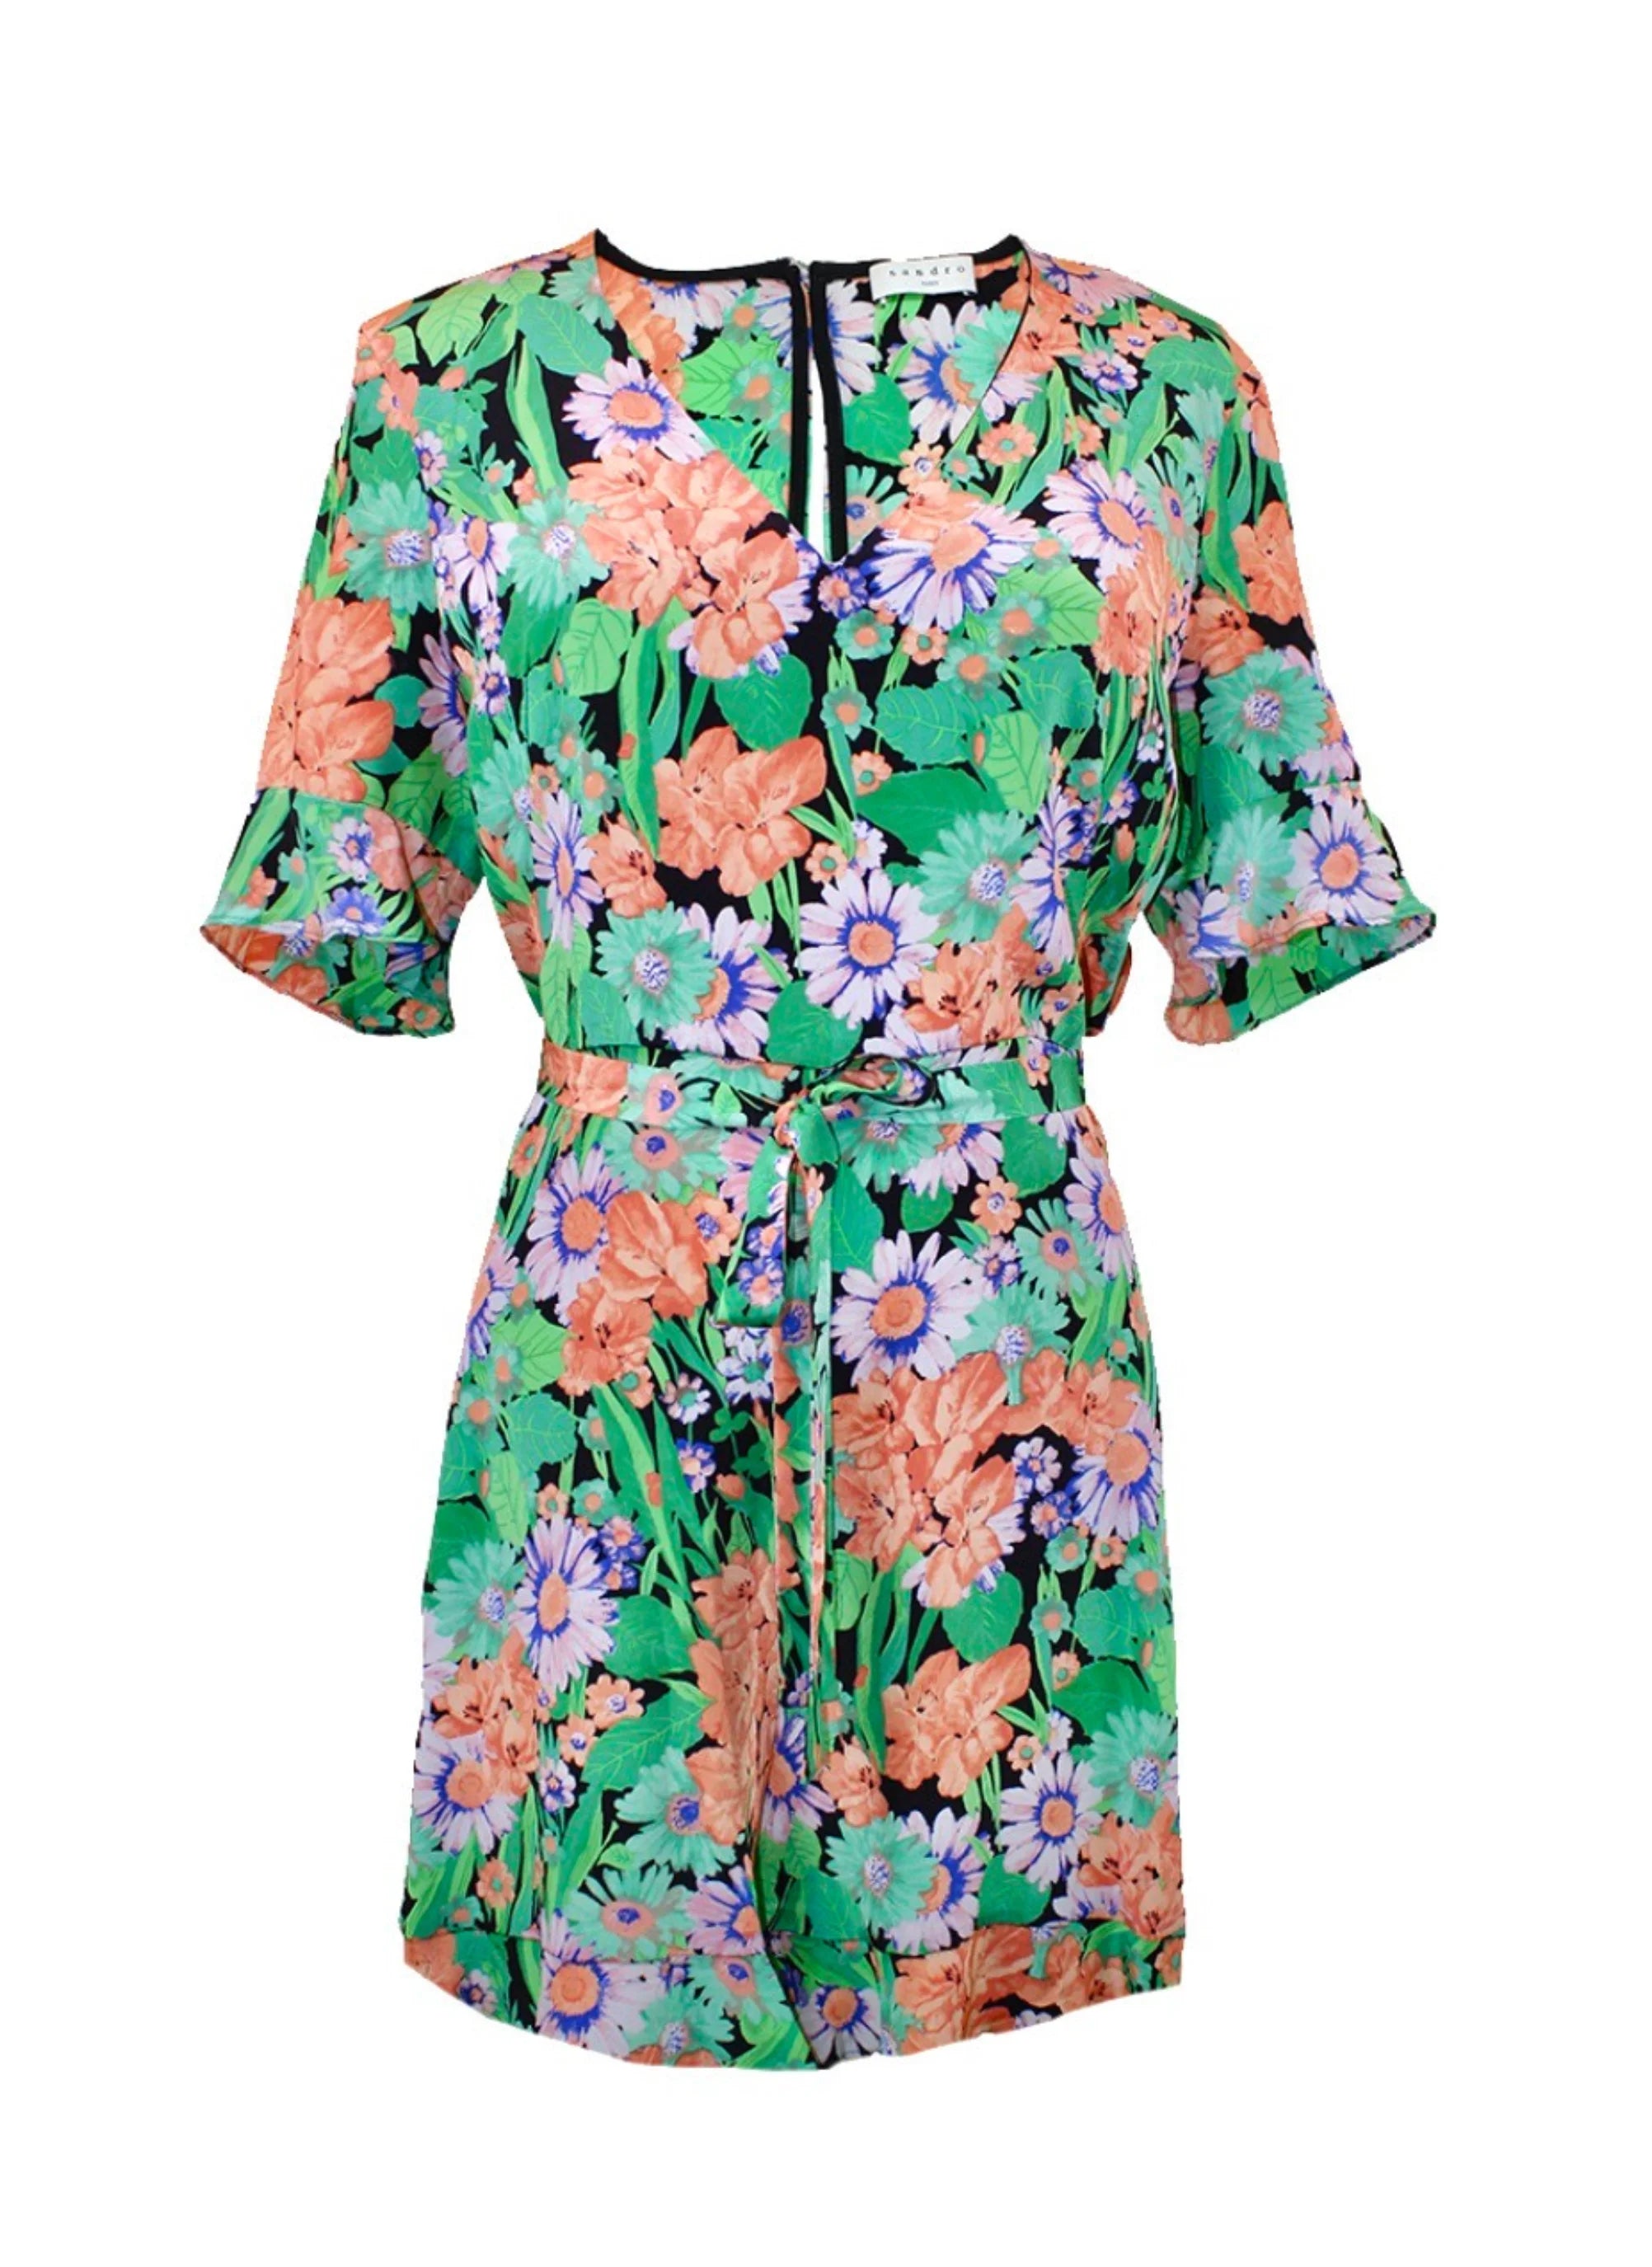 GREEN SILK PLAYSUIT WITH FLORAL PATTERN